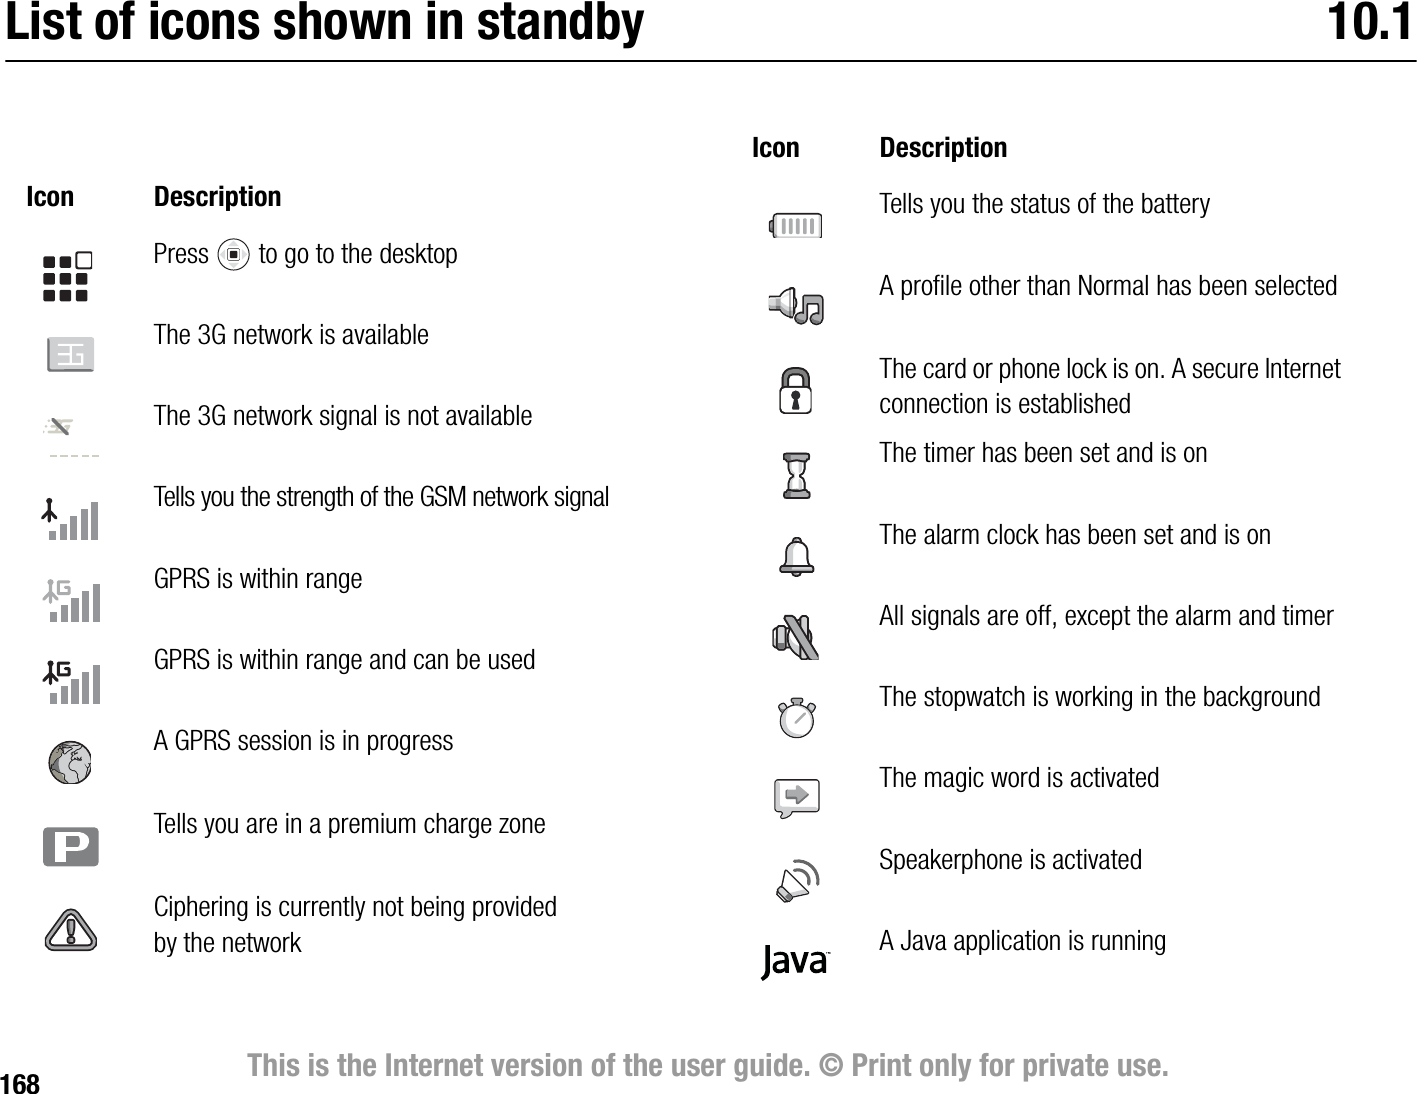 168 This is the Internet version of the user guide. © Print only for private use.List of icons shown in standby 10.1Icon DescriptionPress   to go to the desktopThe 3G network is availableThe 3G network signal is not availableTells you the strength of the GSM network signalGPRS is within rangeGPRS is within range and can be usedA GPRS session is in progressTells you are in a premium charge zoneCiphering is currently not being provided by the networkTells you the status of the batteryA profile other than Normal has been selectedThe card or phone lock is on. A secure Internet connection is establishedThe timer has been set and is onThe alarm clock has been set and is onAll signals are off, except the alarm and timerThe stopwatch is working in the background The magic word is activatedSpeakerphone is activated A Java application is runningIcon Description